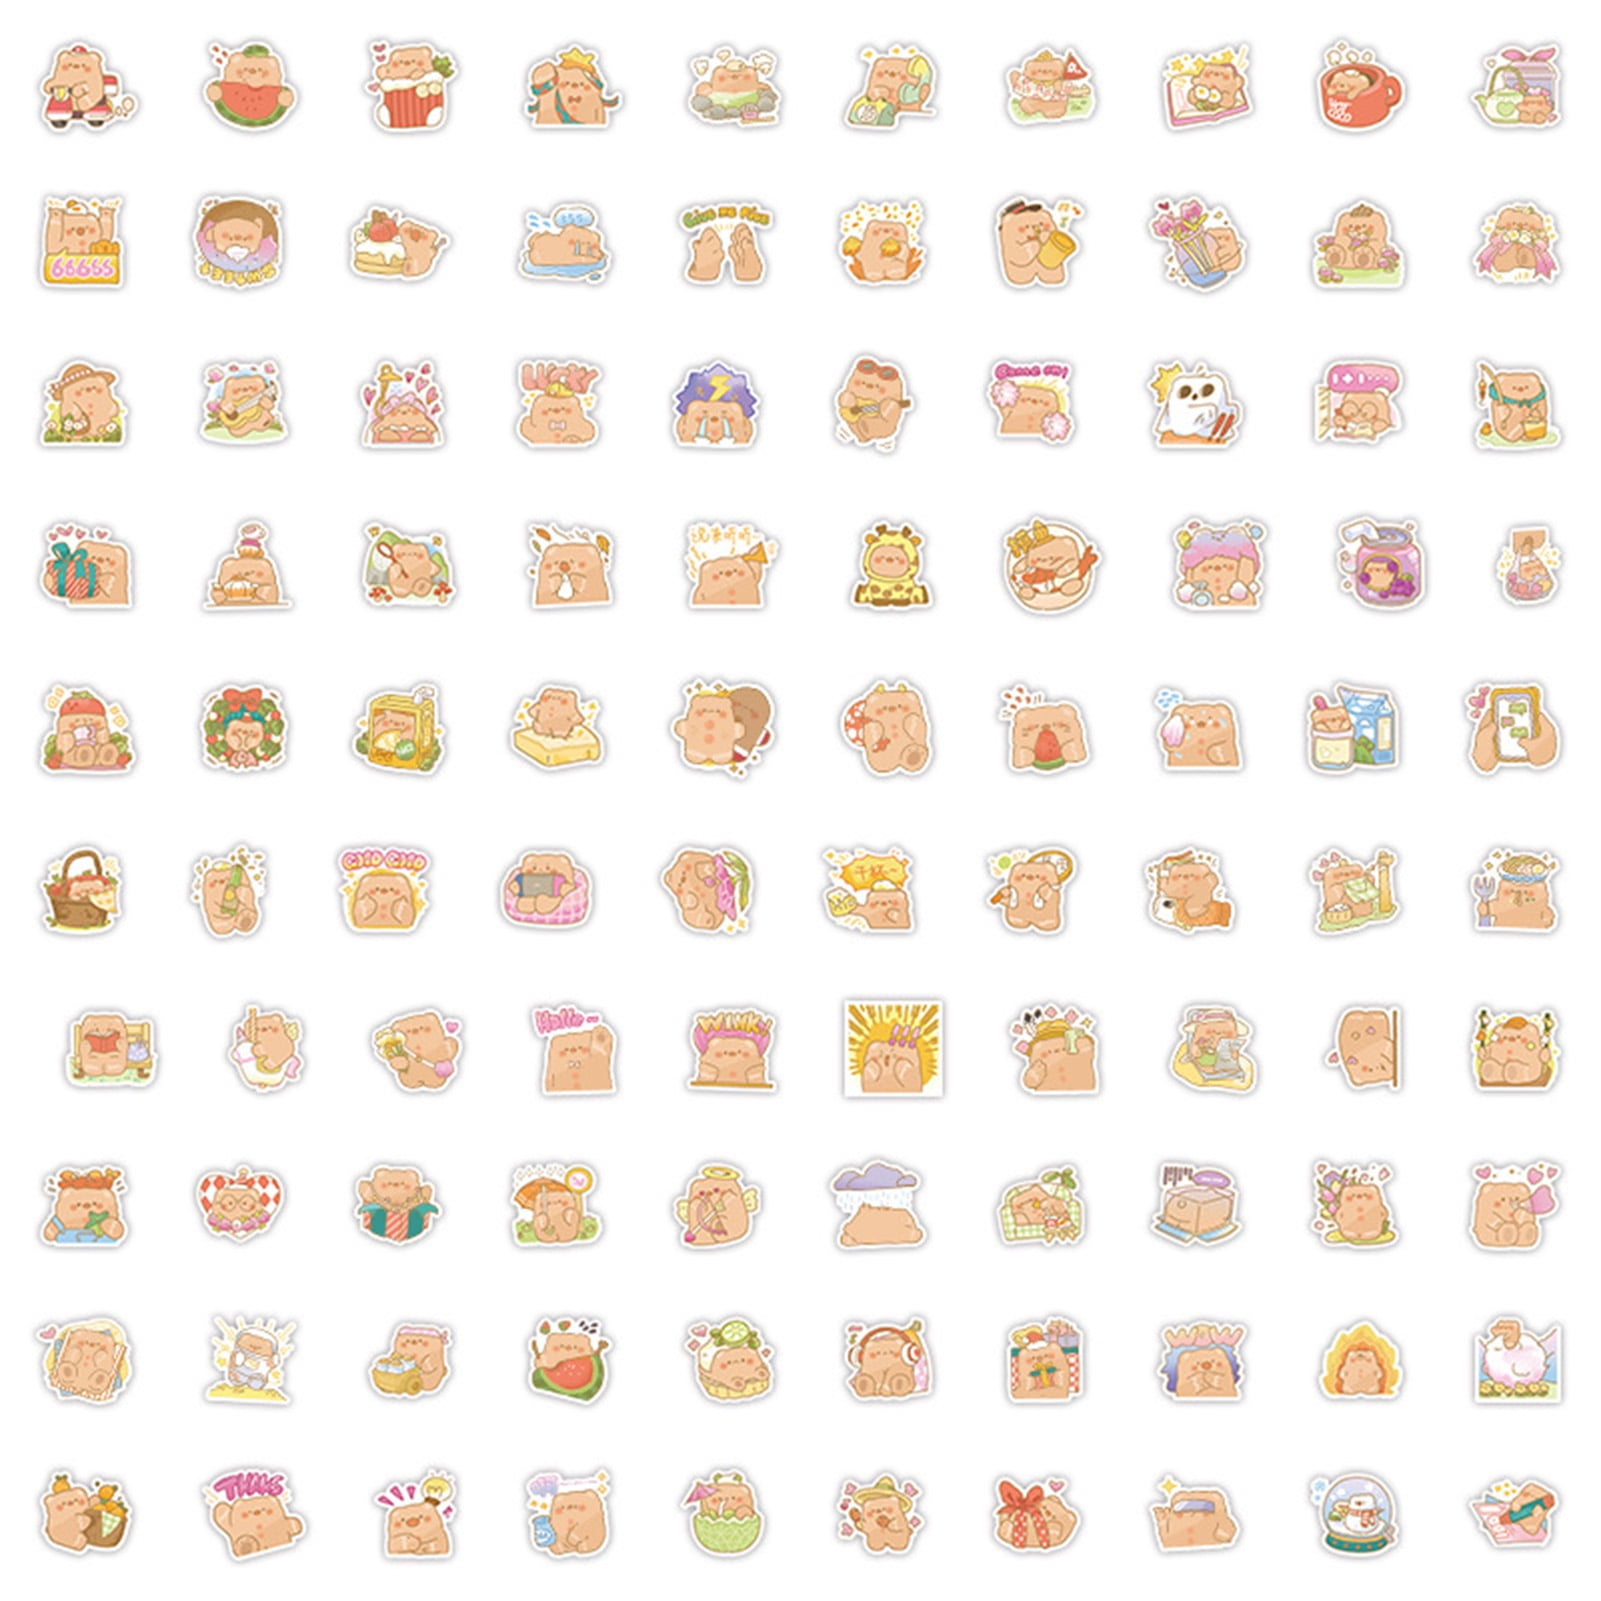 Trayknick 100PCS Cartoon Bear Stickers - Lovely Animal Decals for